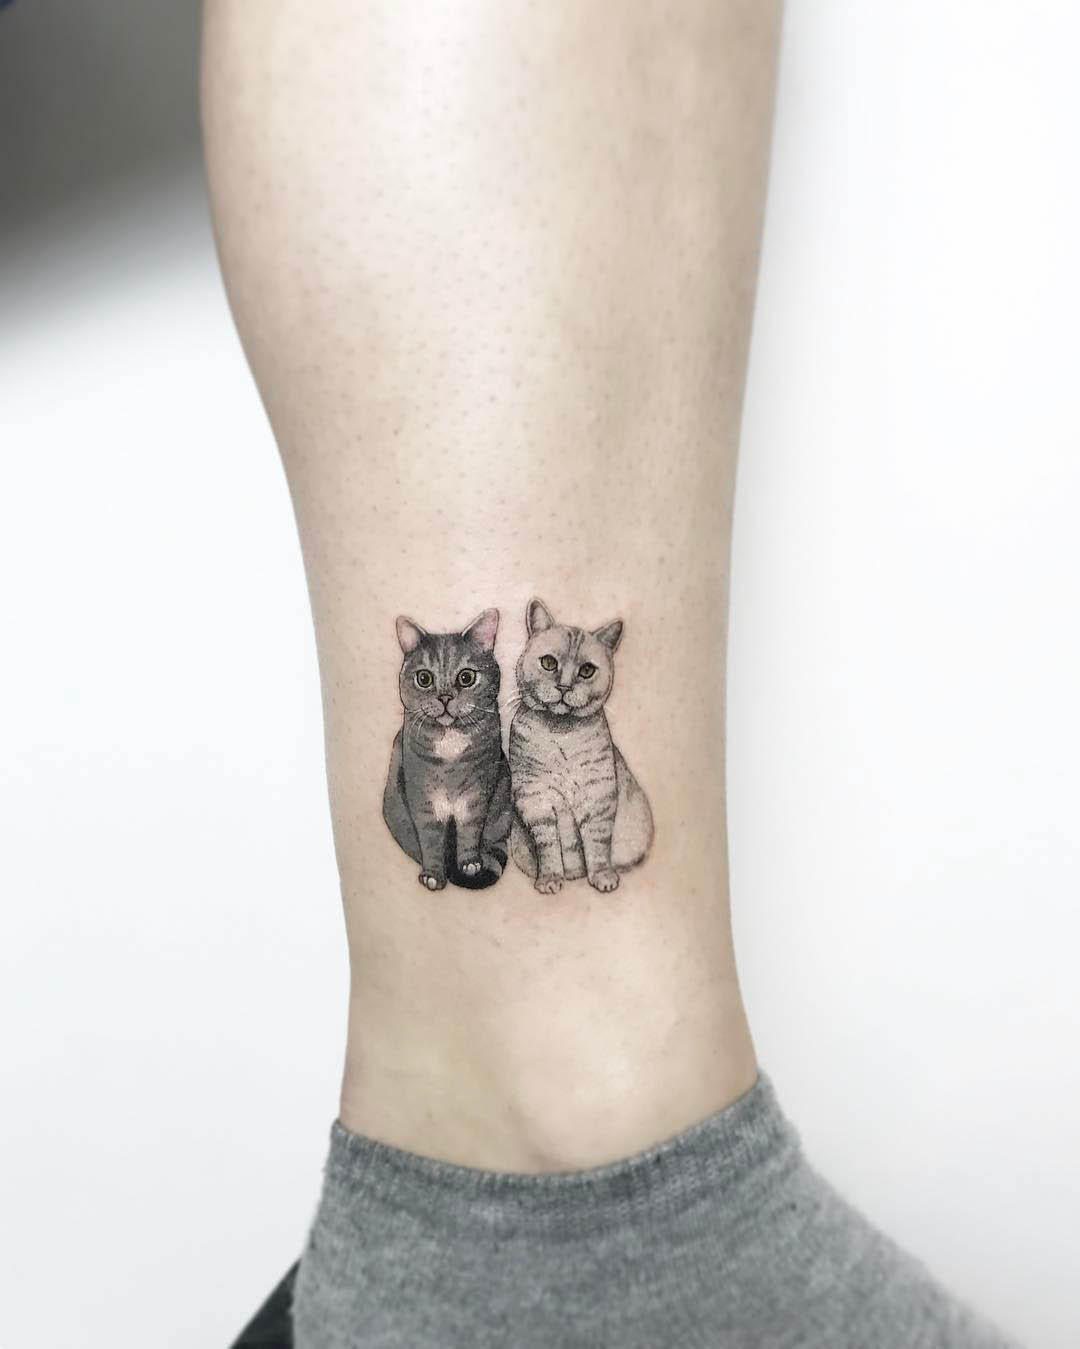 Small cats tattoo on ankle